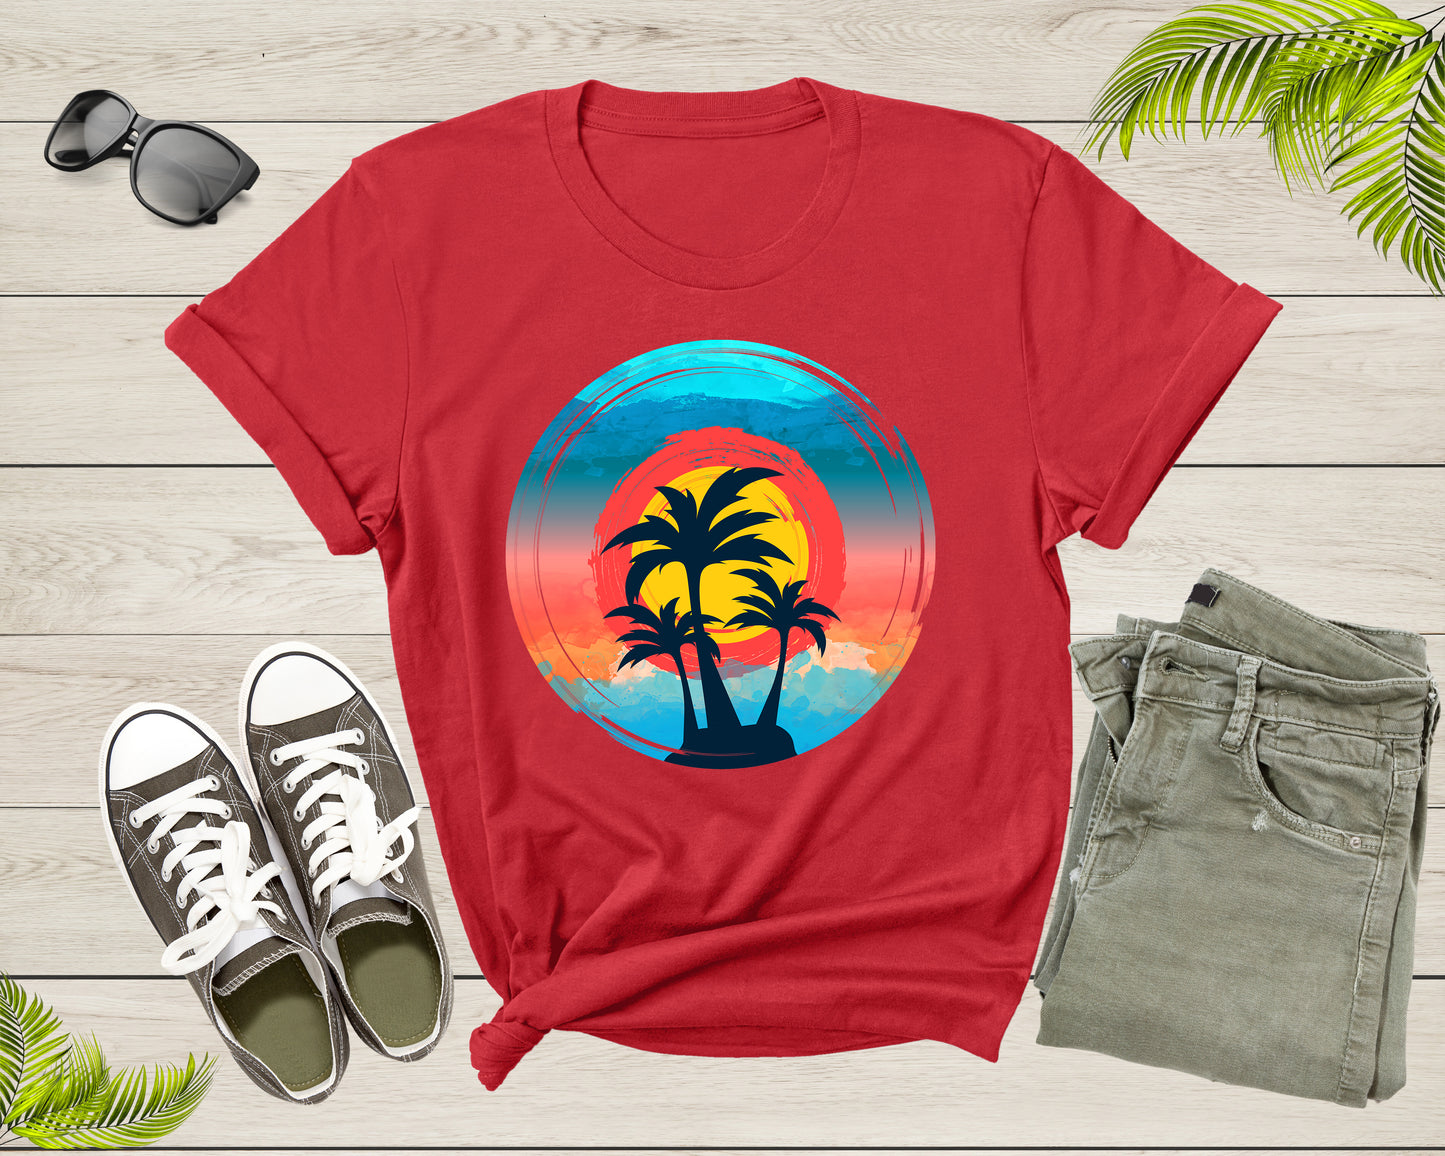 Colorful Beach Sunset Sky Palm Trees for Men Women Kids T-Shirt Summer Shirt for Men Women Kids Boys Girls Teens Summer Graphic Tshirt